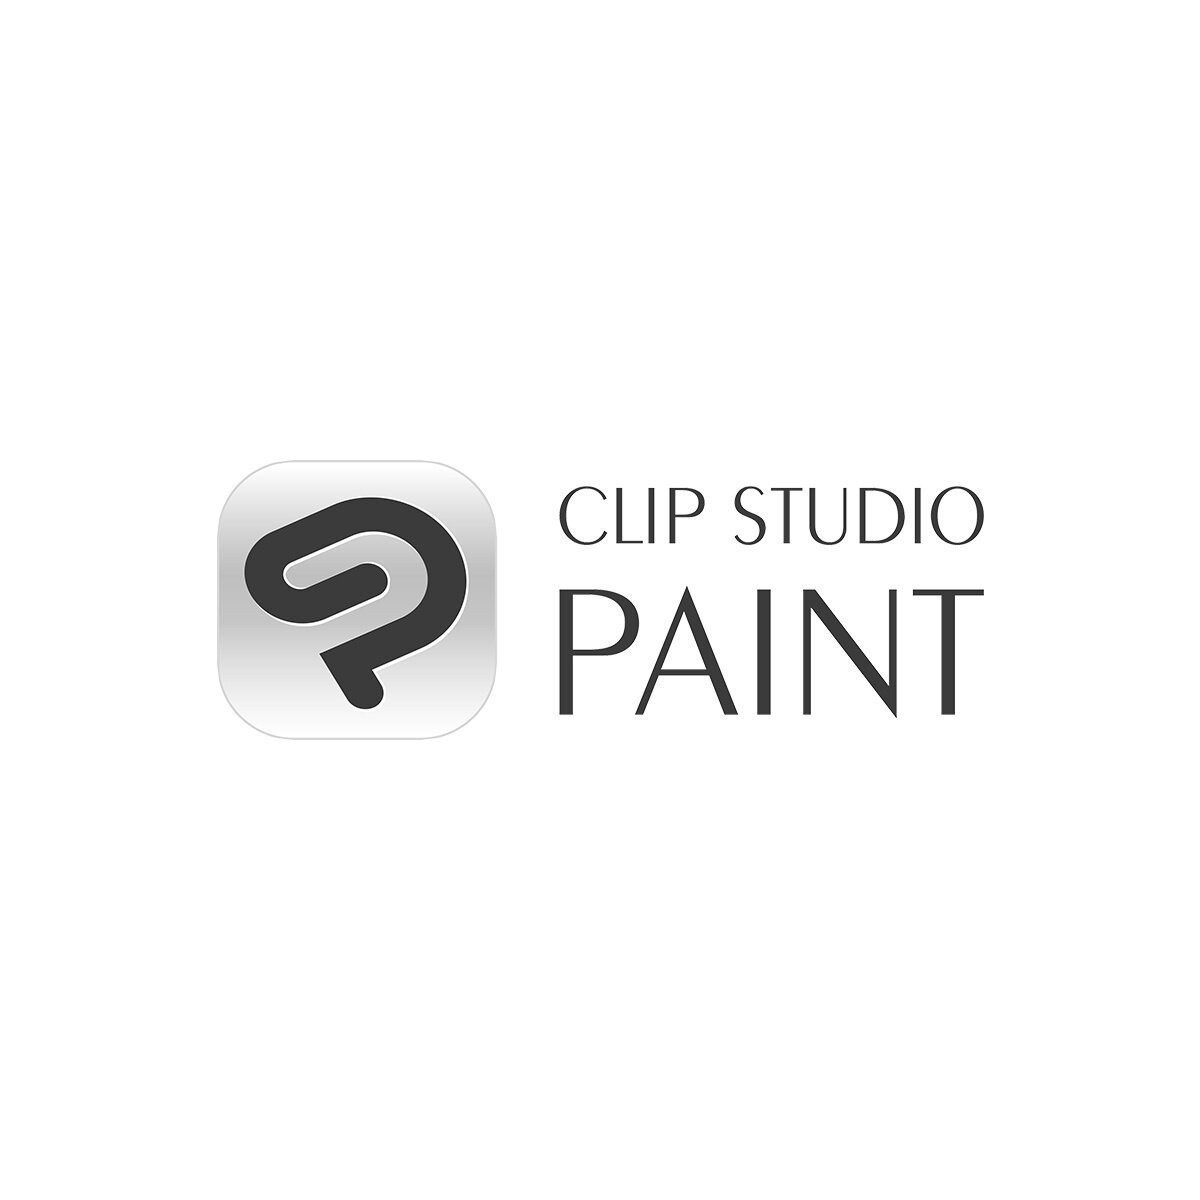 How do I register my activation code? - Clip Studio Official Support